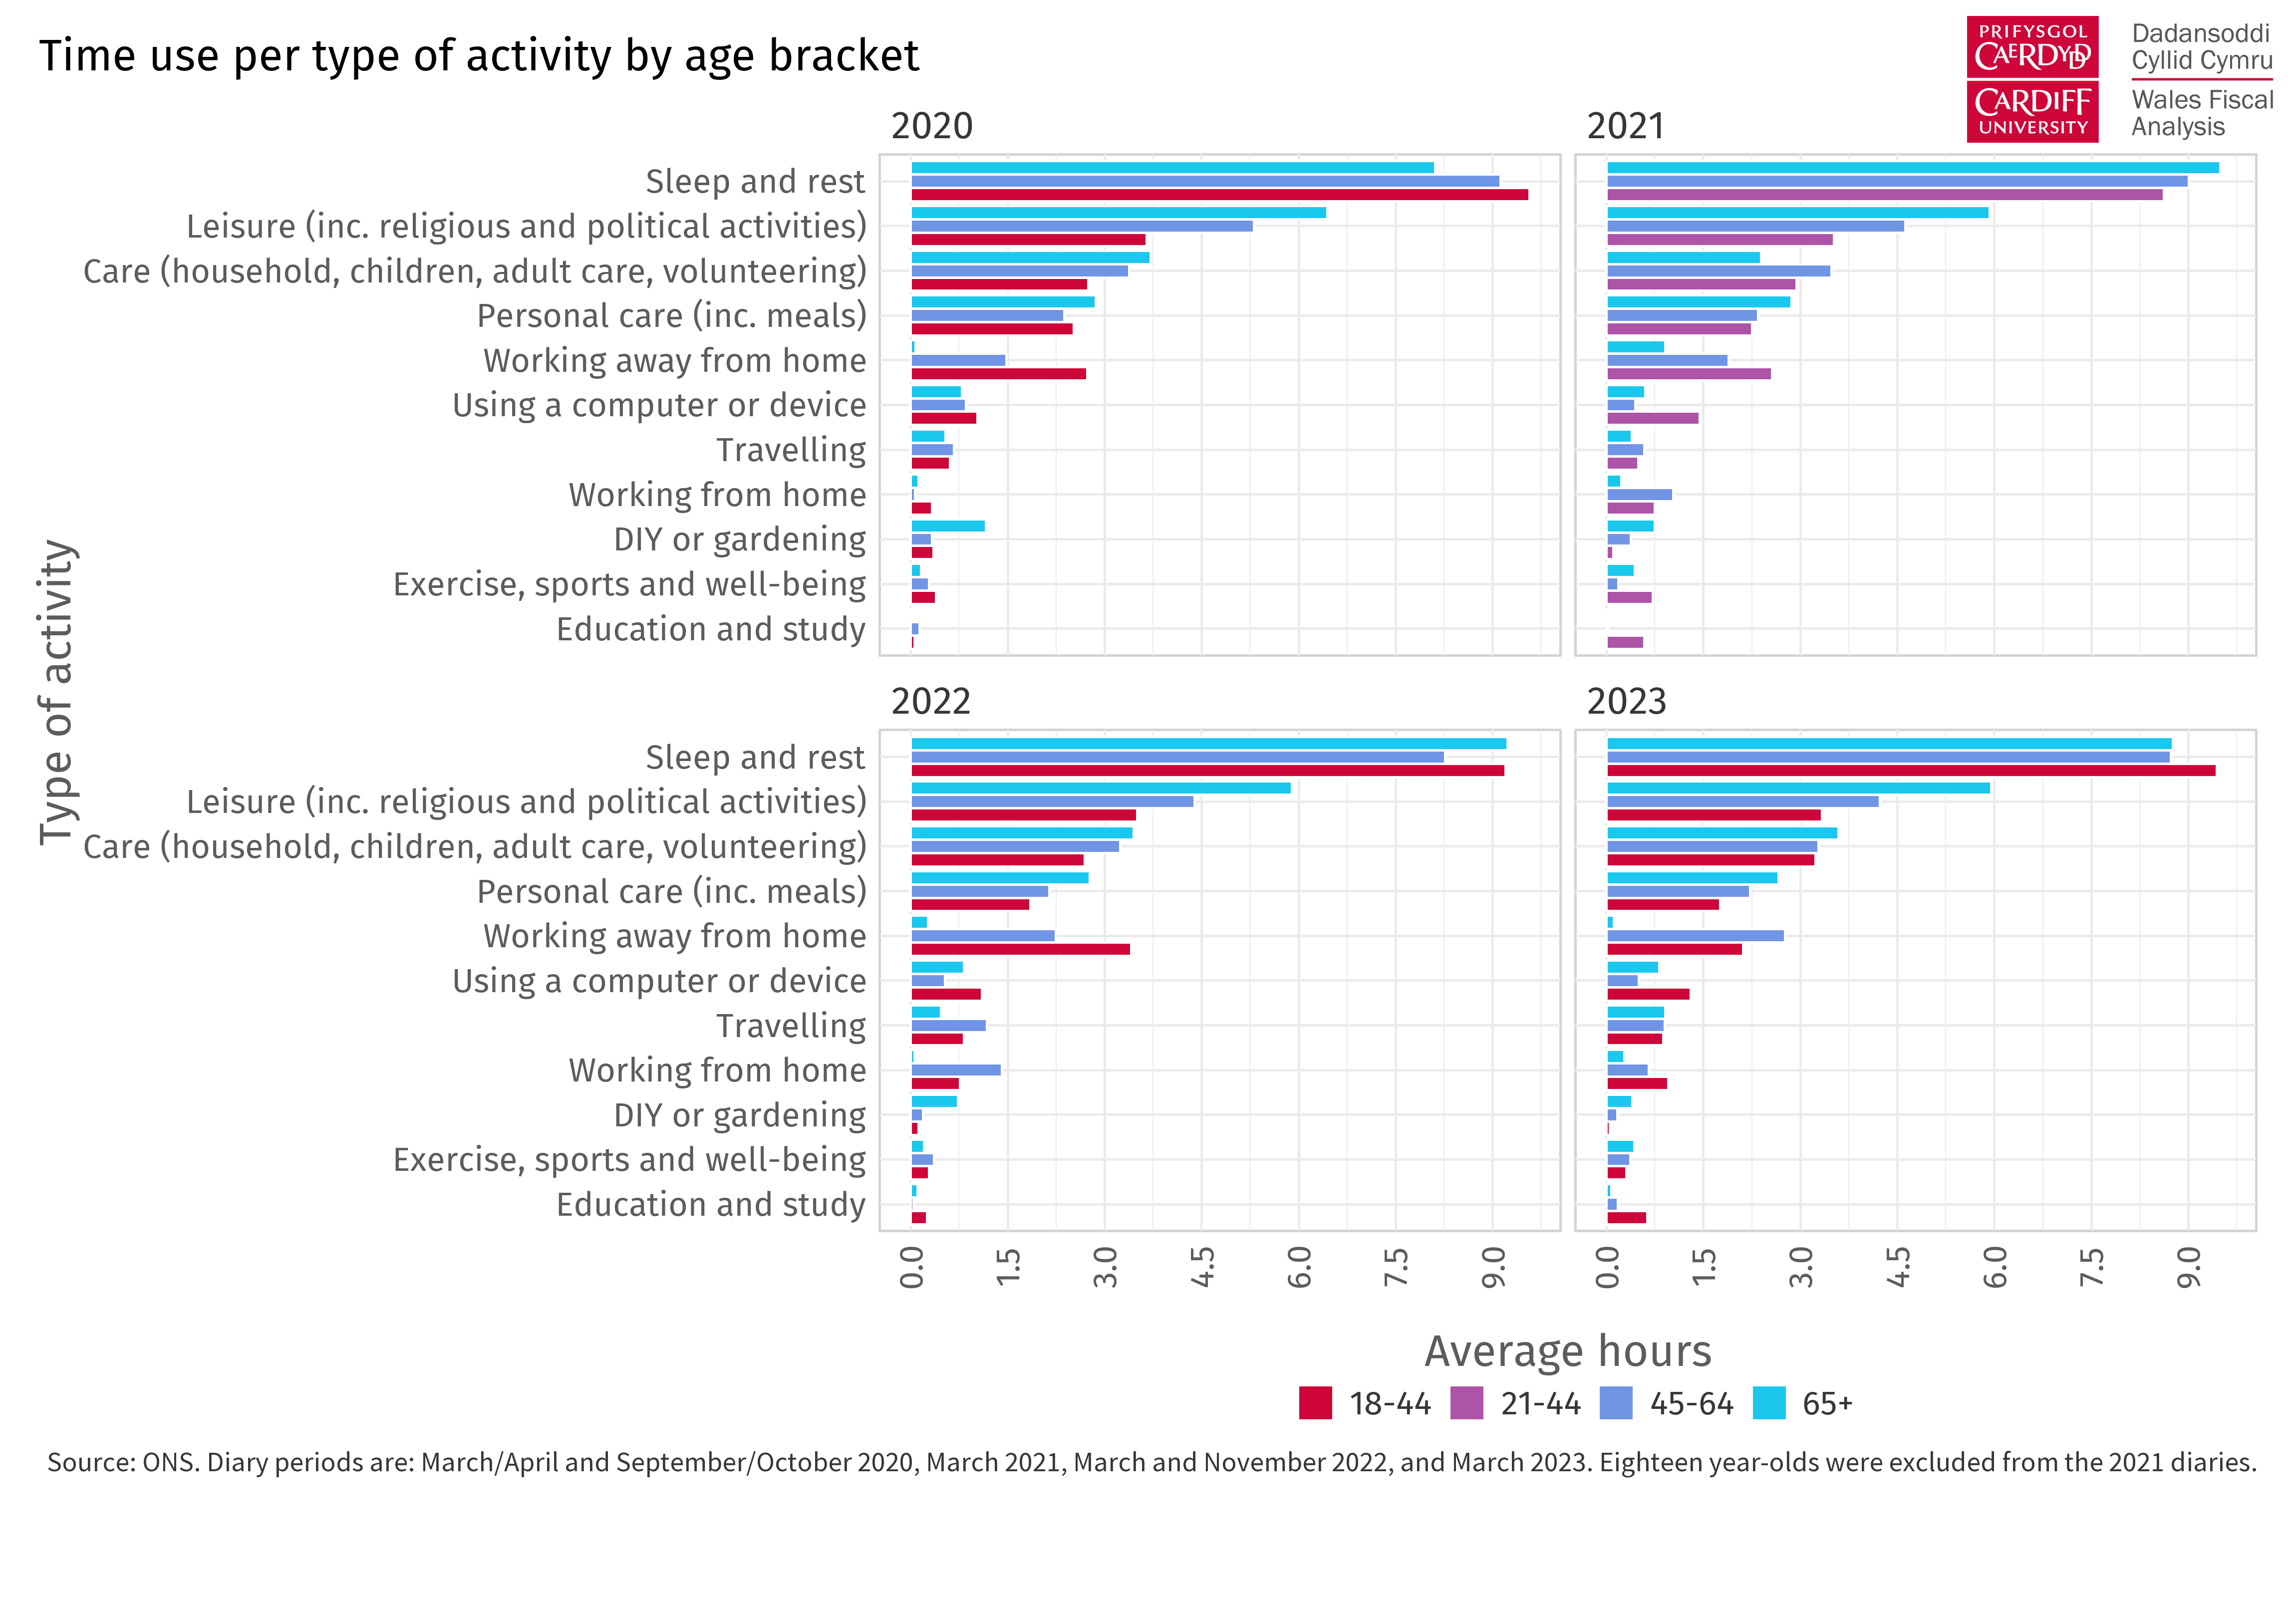 Four horizontal bar charts showing the average hours spent per activity by age bracket. Each chart refers to a year of the study, 2020, 2021, 2022, 2023.